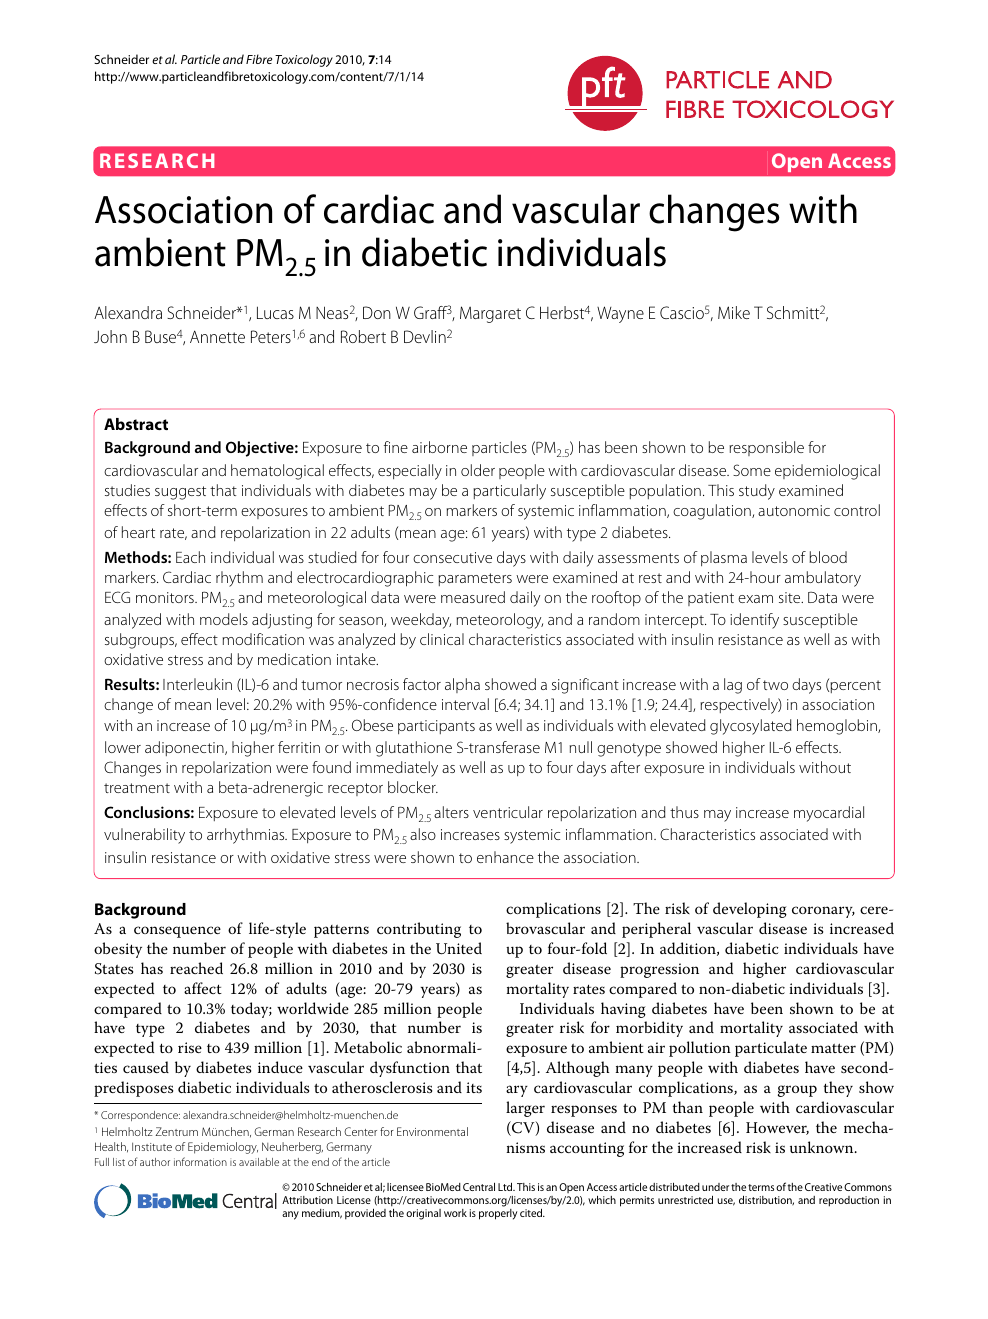 Association Of Cardiac And Vascular Changes With Ambient Pm2 5 In Diabetic Individuals Topic Of Research Paper In Health Sciences Download Scholarly Article Pdf And Read For Free On Cyberleninka Open Science